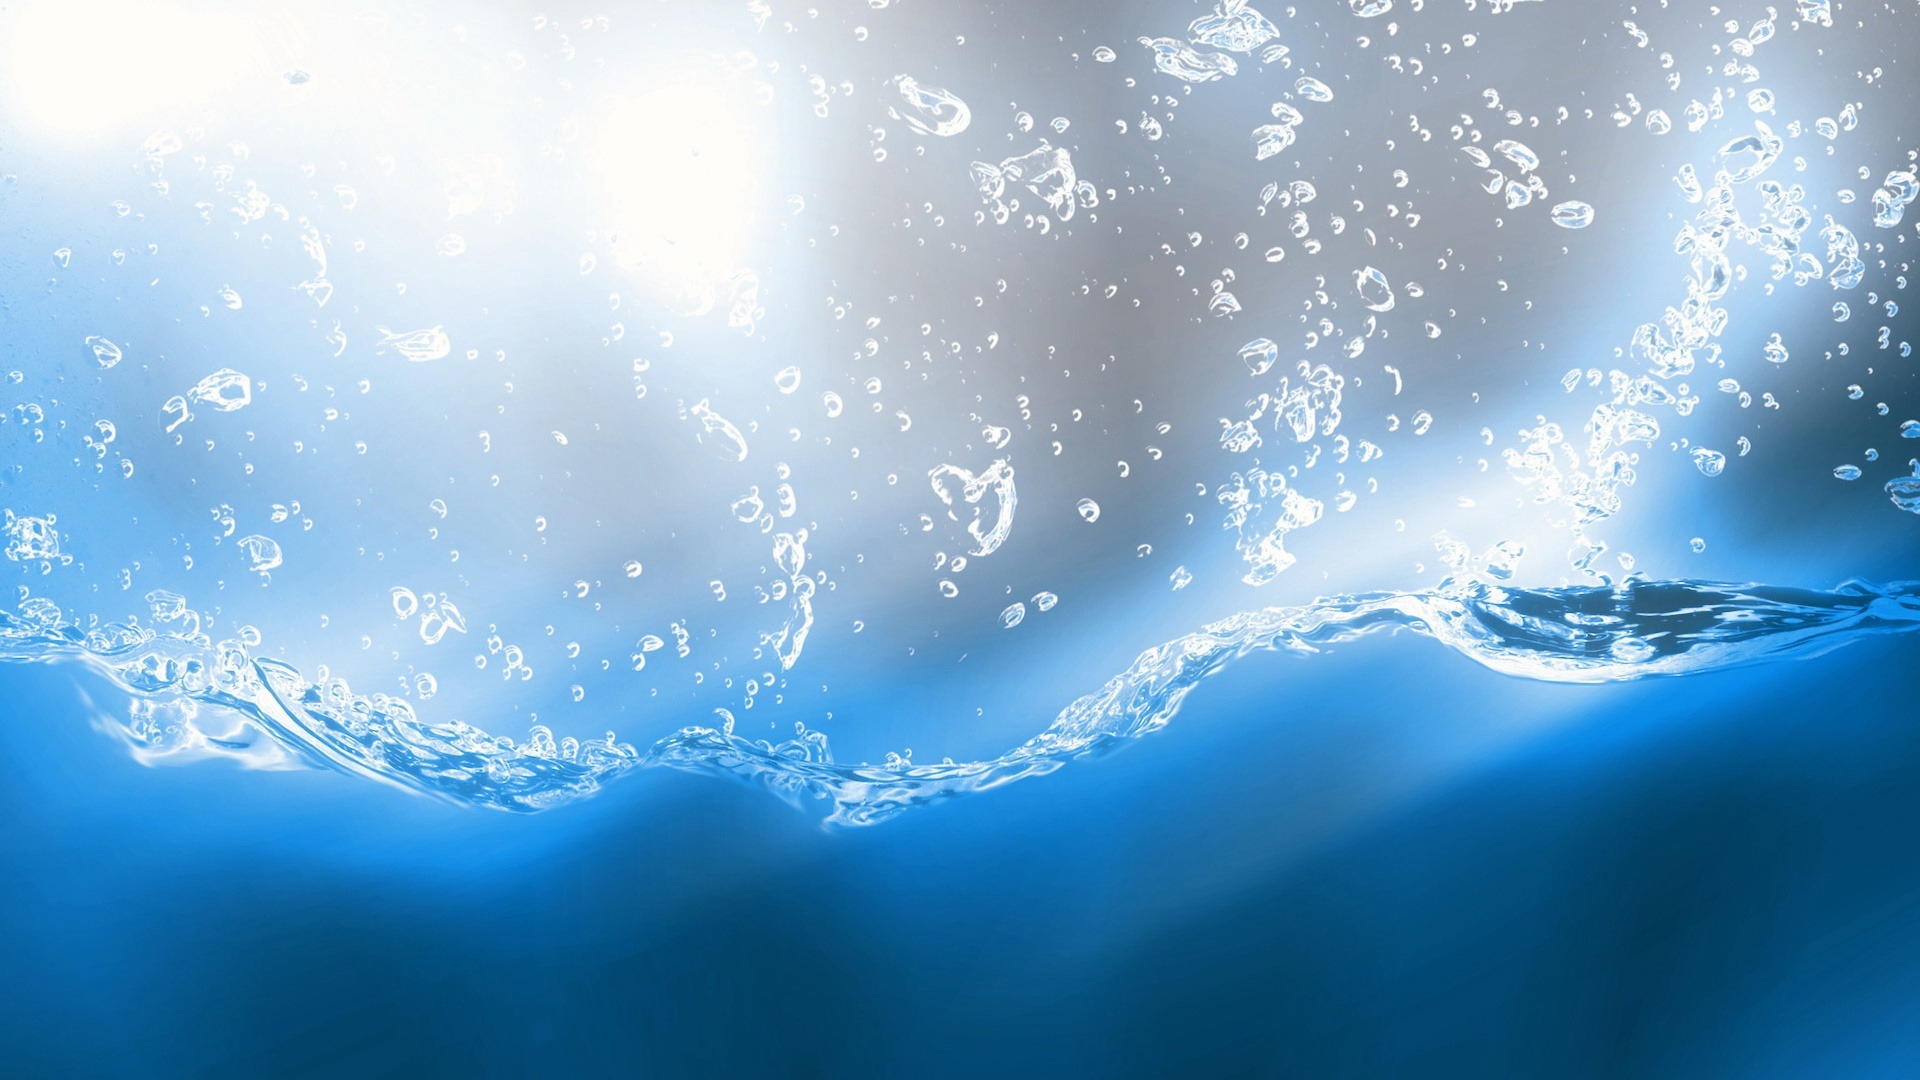 Water Elements for 1920 x 1080 HDTV 1080p resolution